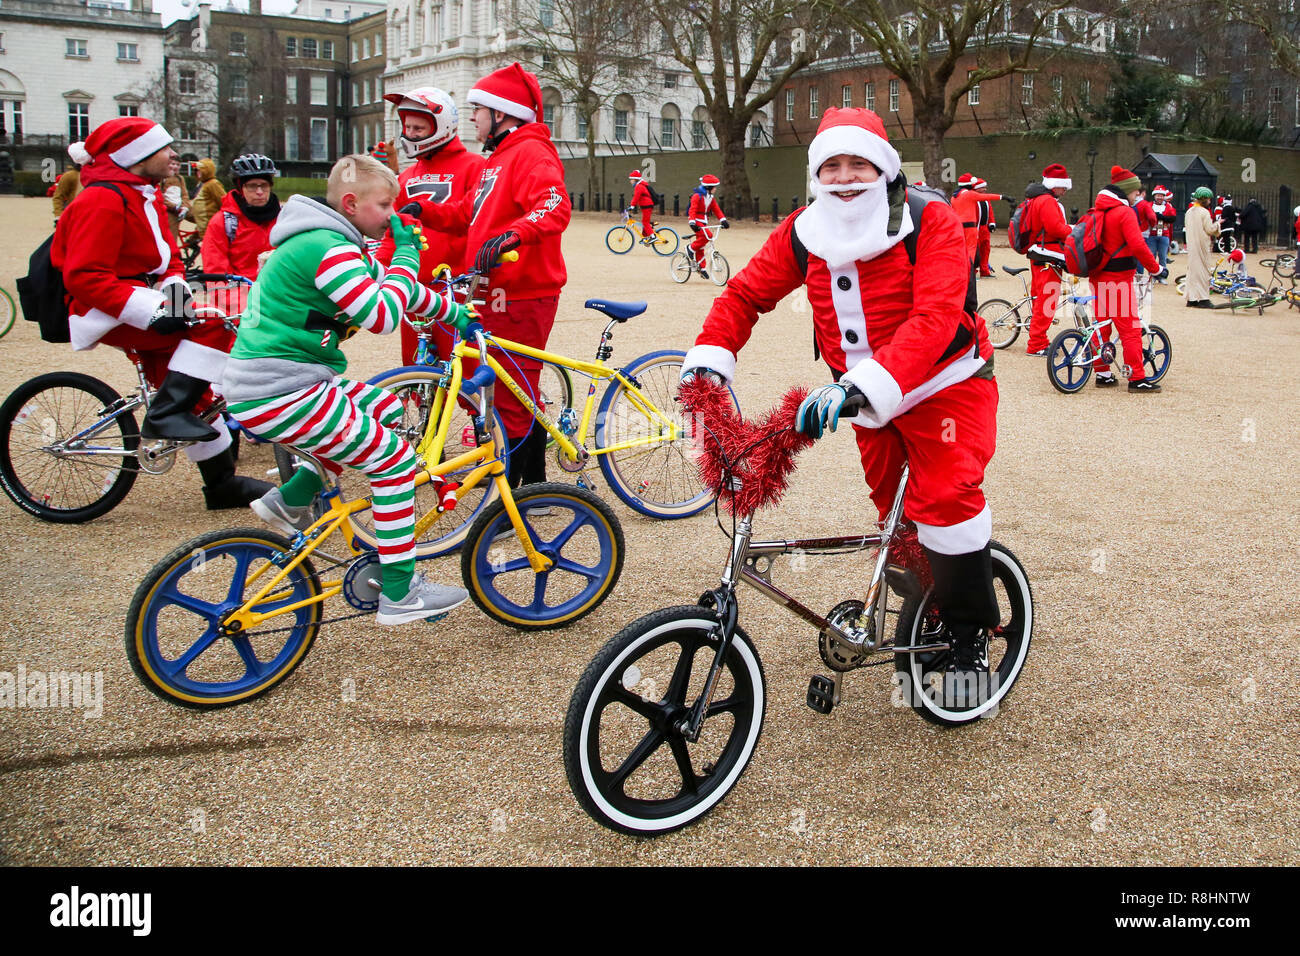 London, UK. 15th Dec, 2018. A man dressed as Father Christmas is seen before cycling during the event.Cycling through London to raise awareness and money for Evelina London Children's Hospital (ECHO), for children with heart conditions. The annual event began four years ago after Stephane Wright's son Tommy, suffered a heart attack and spent time at Evelina London. Tommy was only 6 months old when he suffered a heart attack and nearly died. Fortunately Tommy recovered well but will require further operations as he grows up, so will be returning to the Evelina London in time Stock Photo